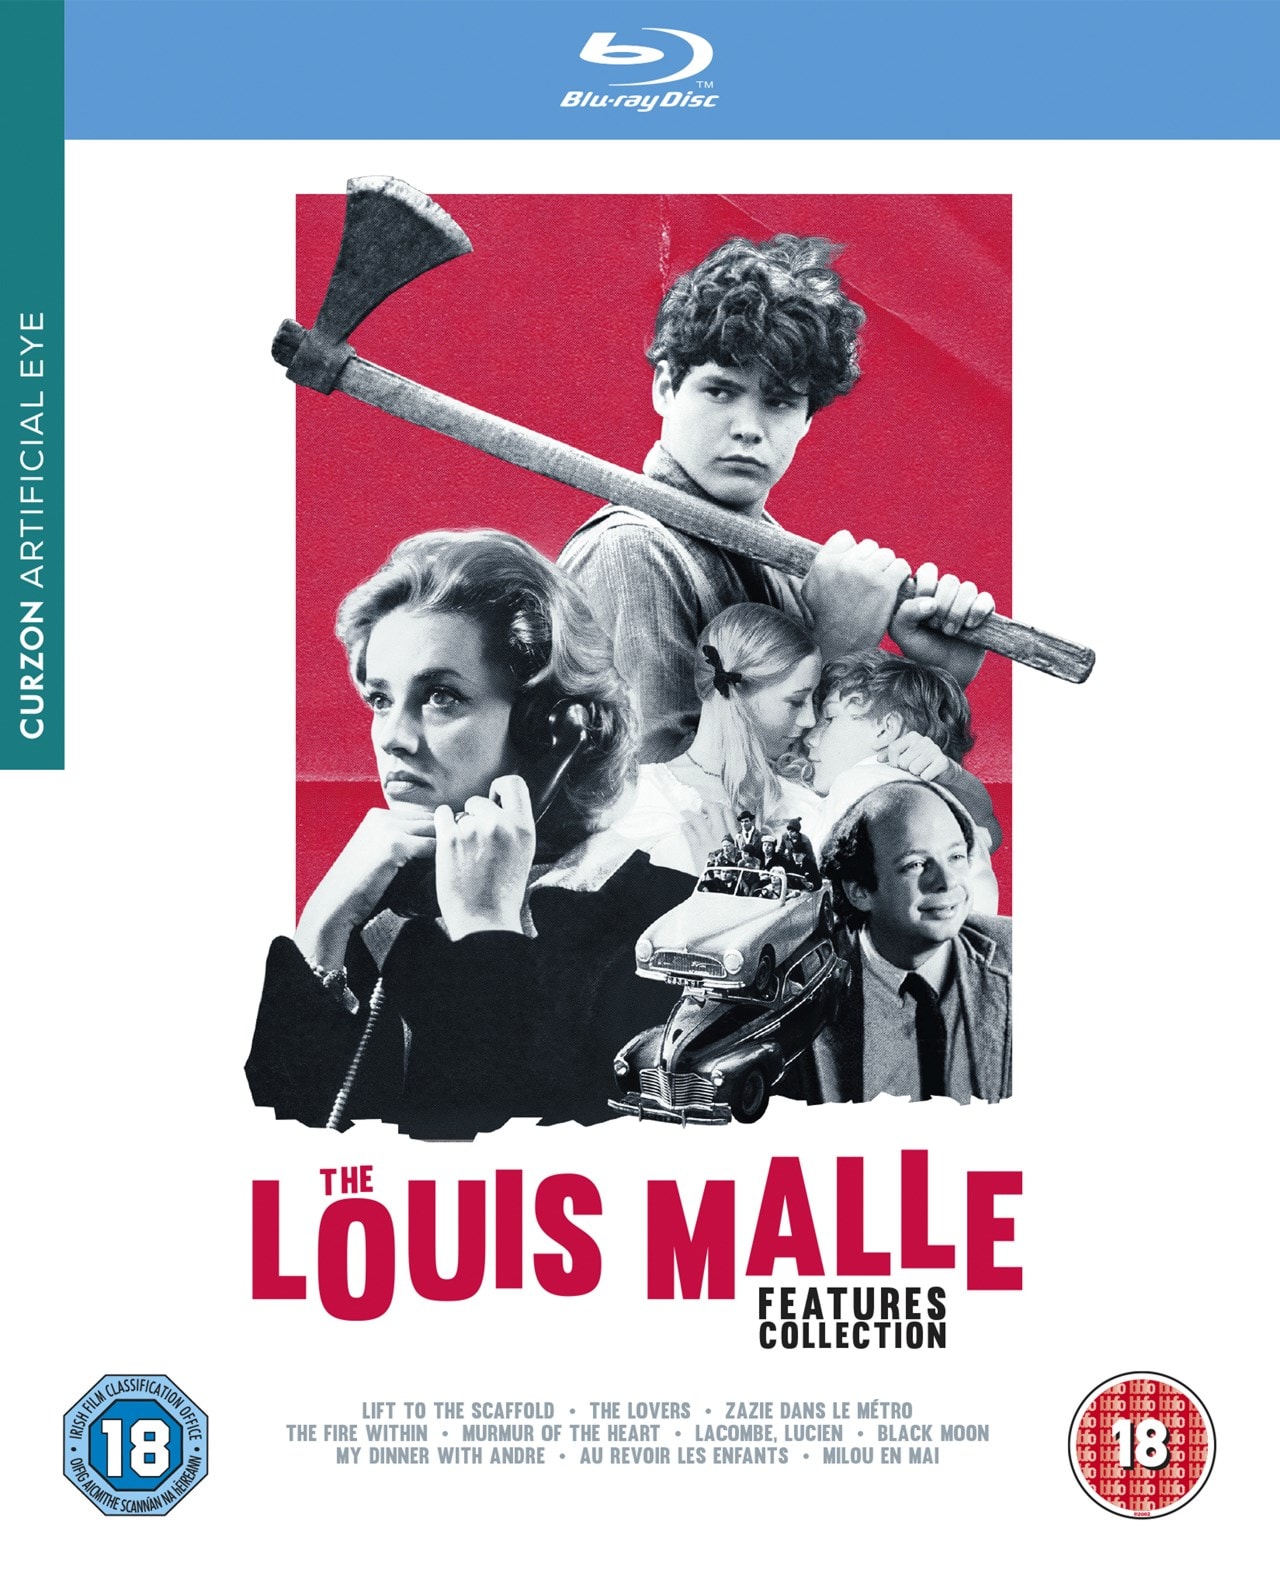 The Louis Malle Features Collection | Blu-ray Box Set | Free shipping over £20 | HMV Store